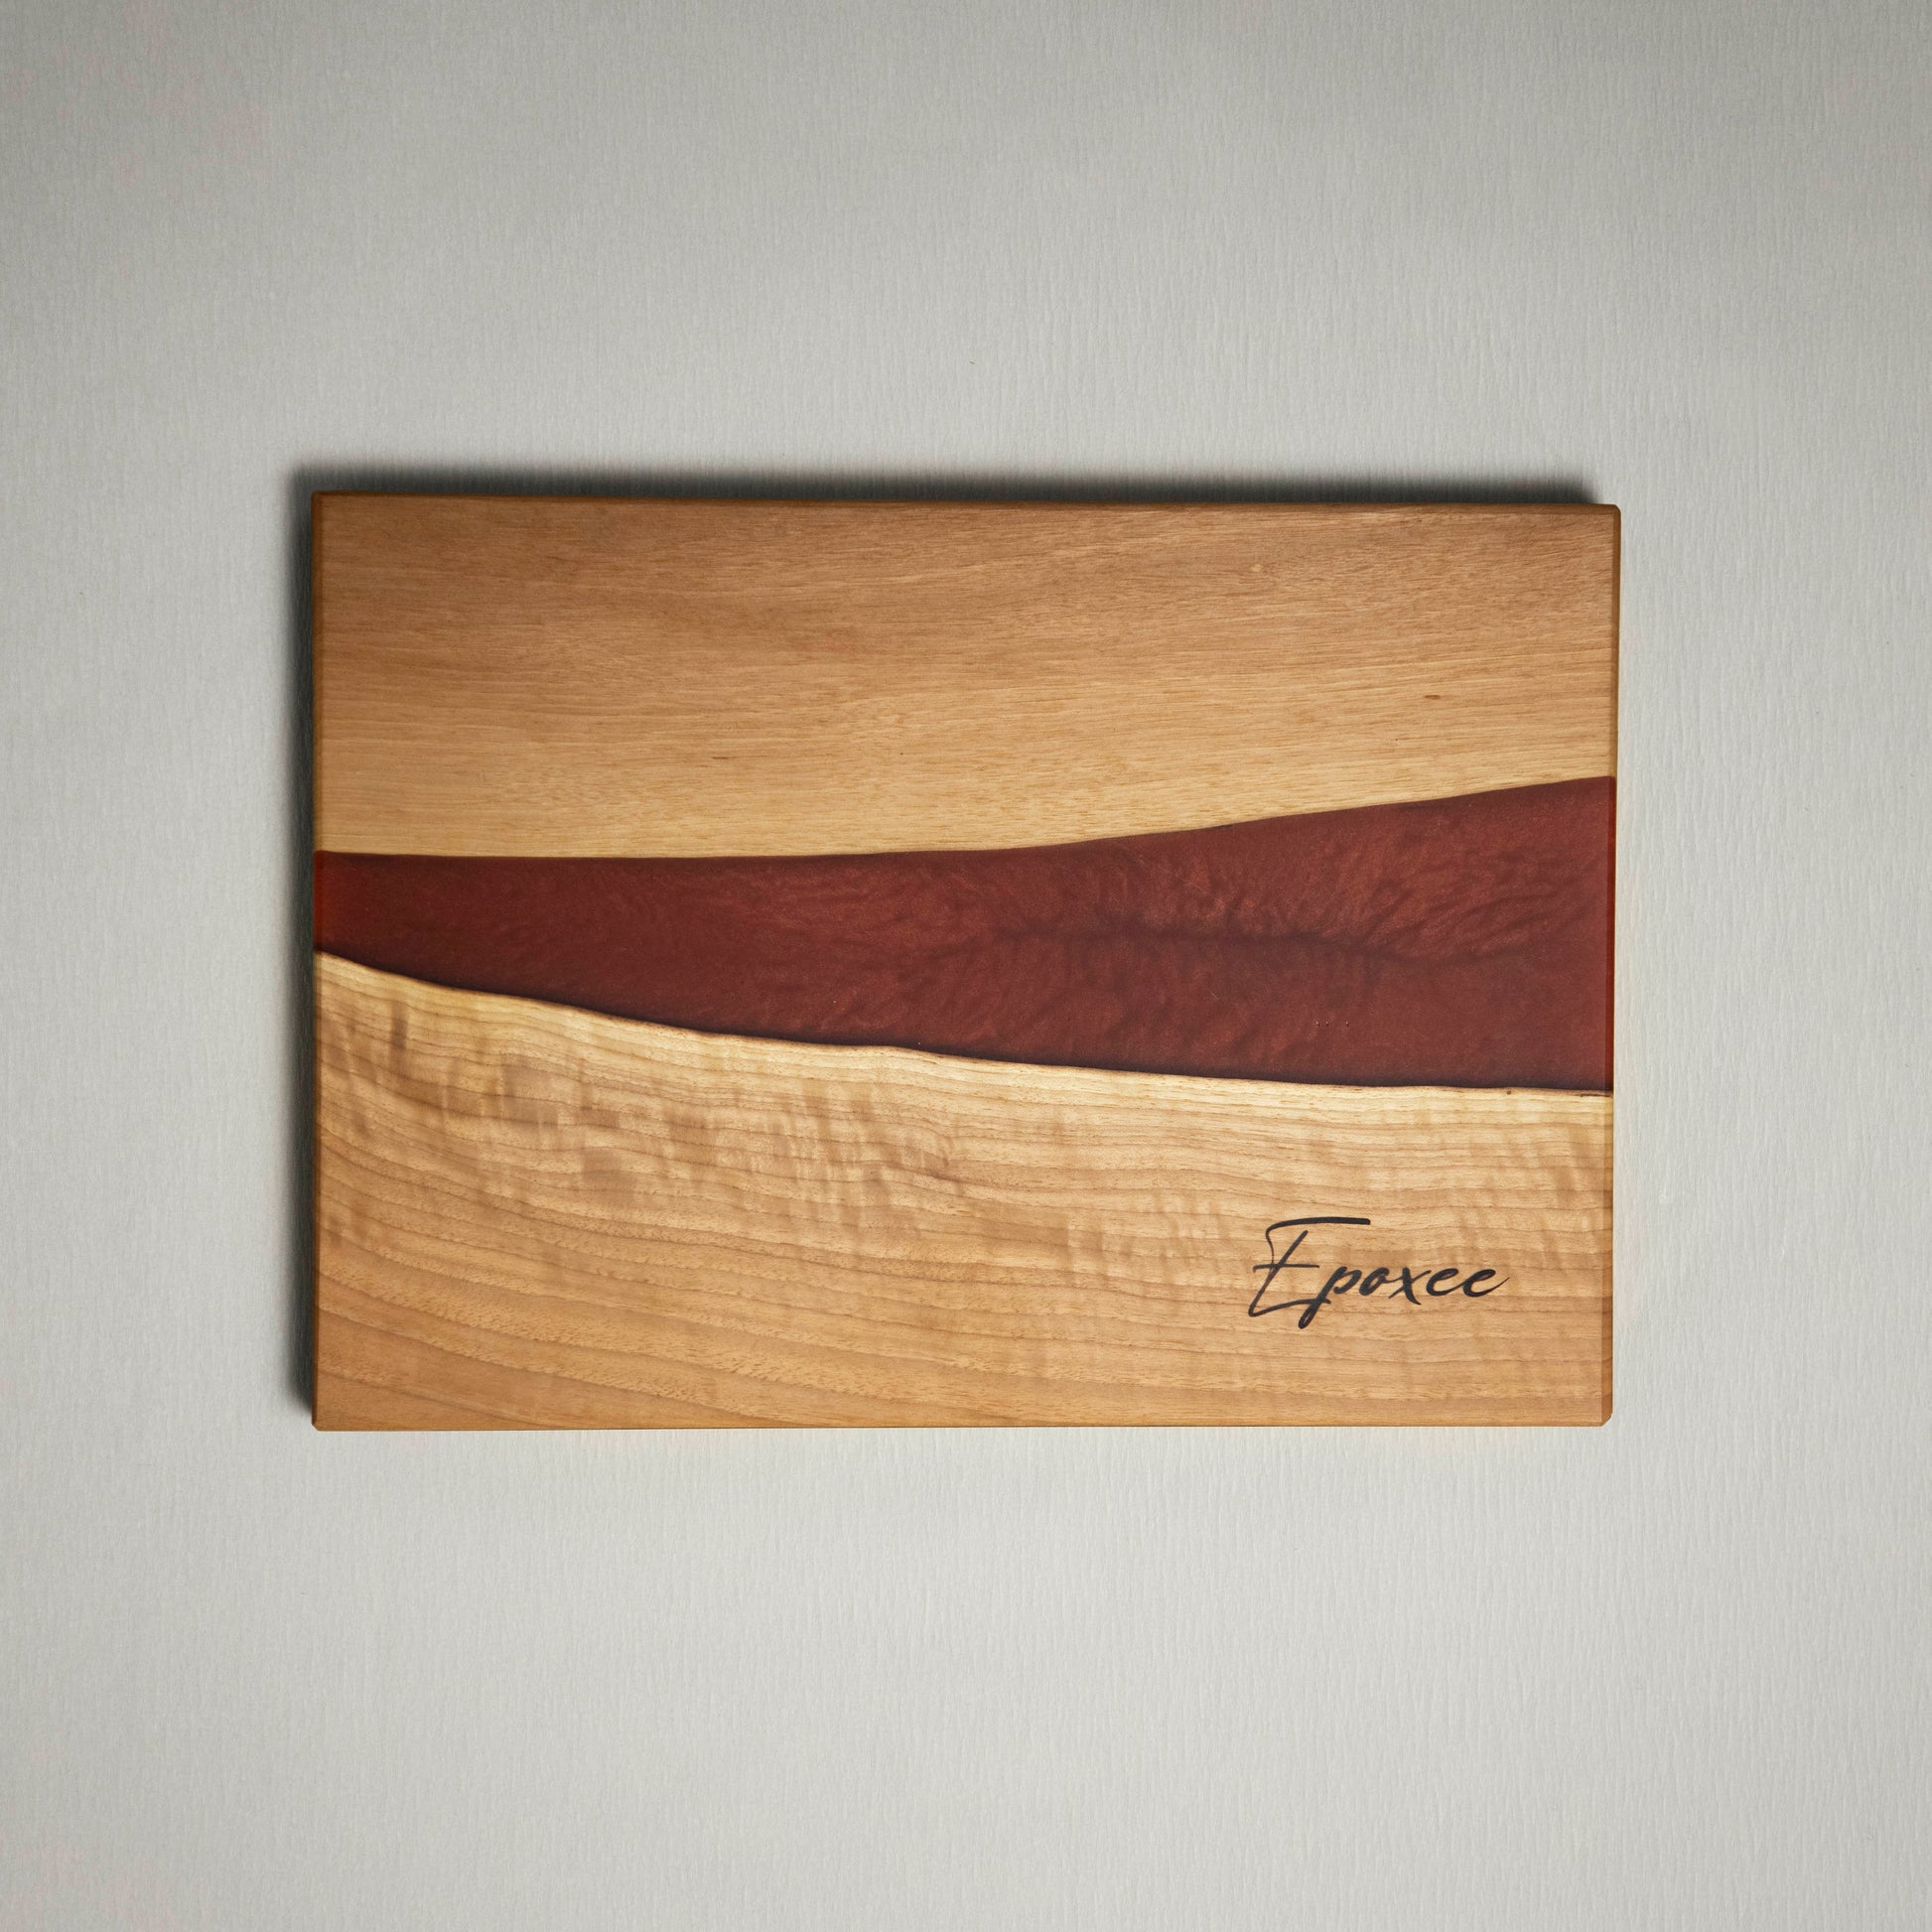 Serving board made from wood and epoxy resin in the color red orange